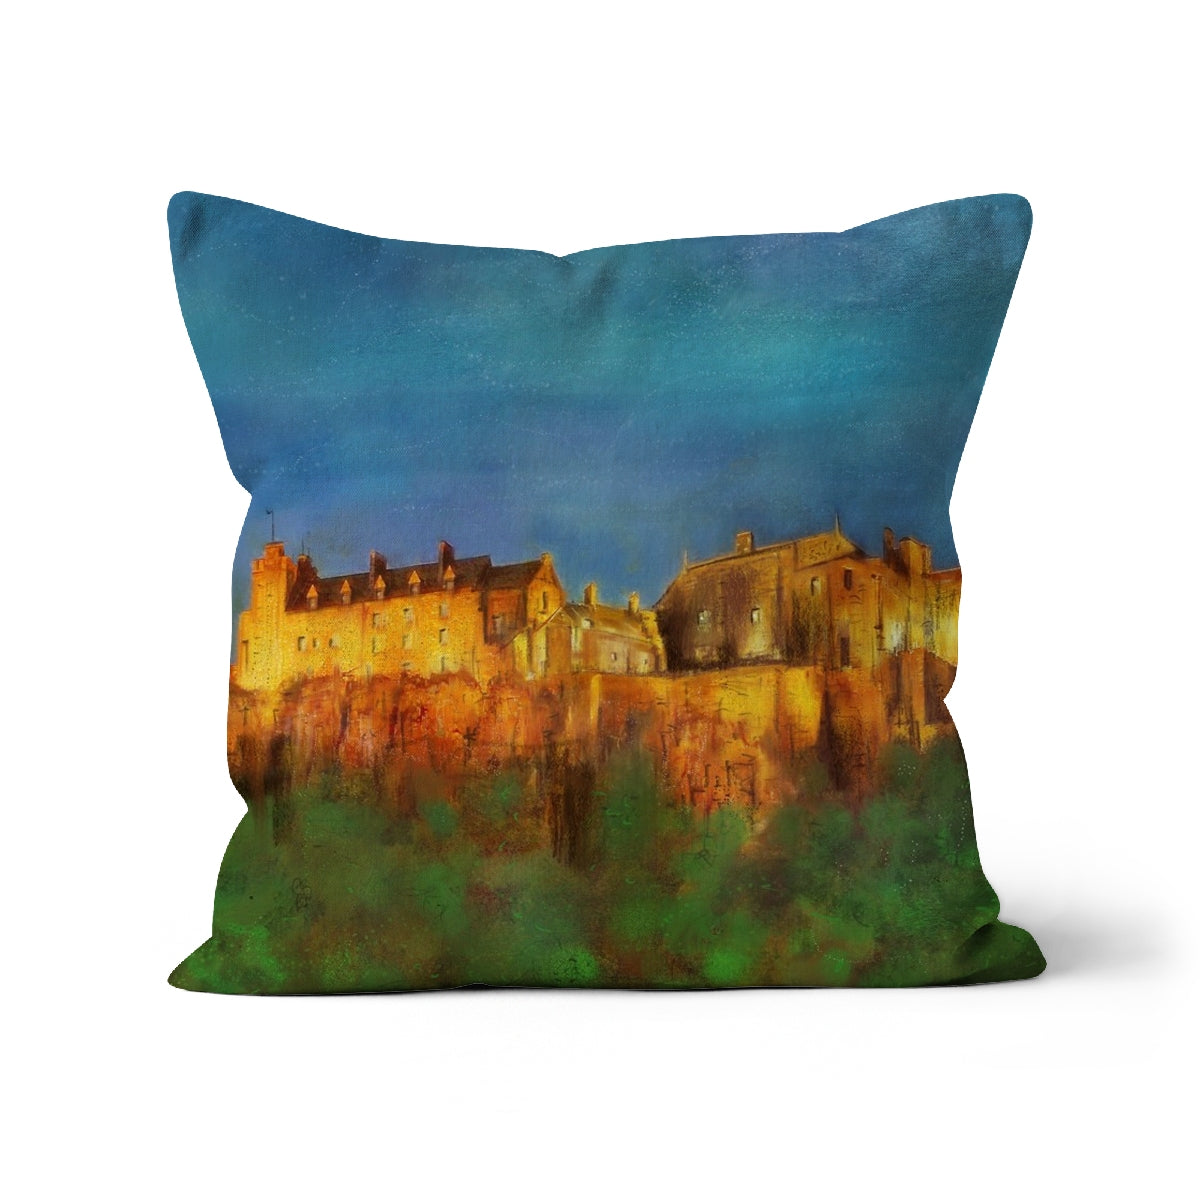 Stirling Castle Art Gifts Cushion-Cushions-Historic & Iconic Scotland Art Gallery-Canvas-16"x16"-Paintings, Prints, Homeware, Art Gifts From Scotland By Scottish Artist Kevin Hunter